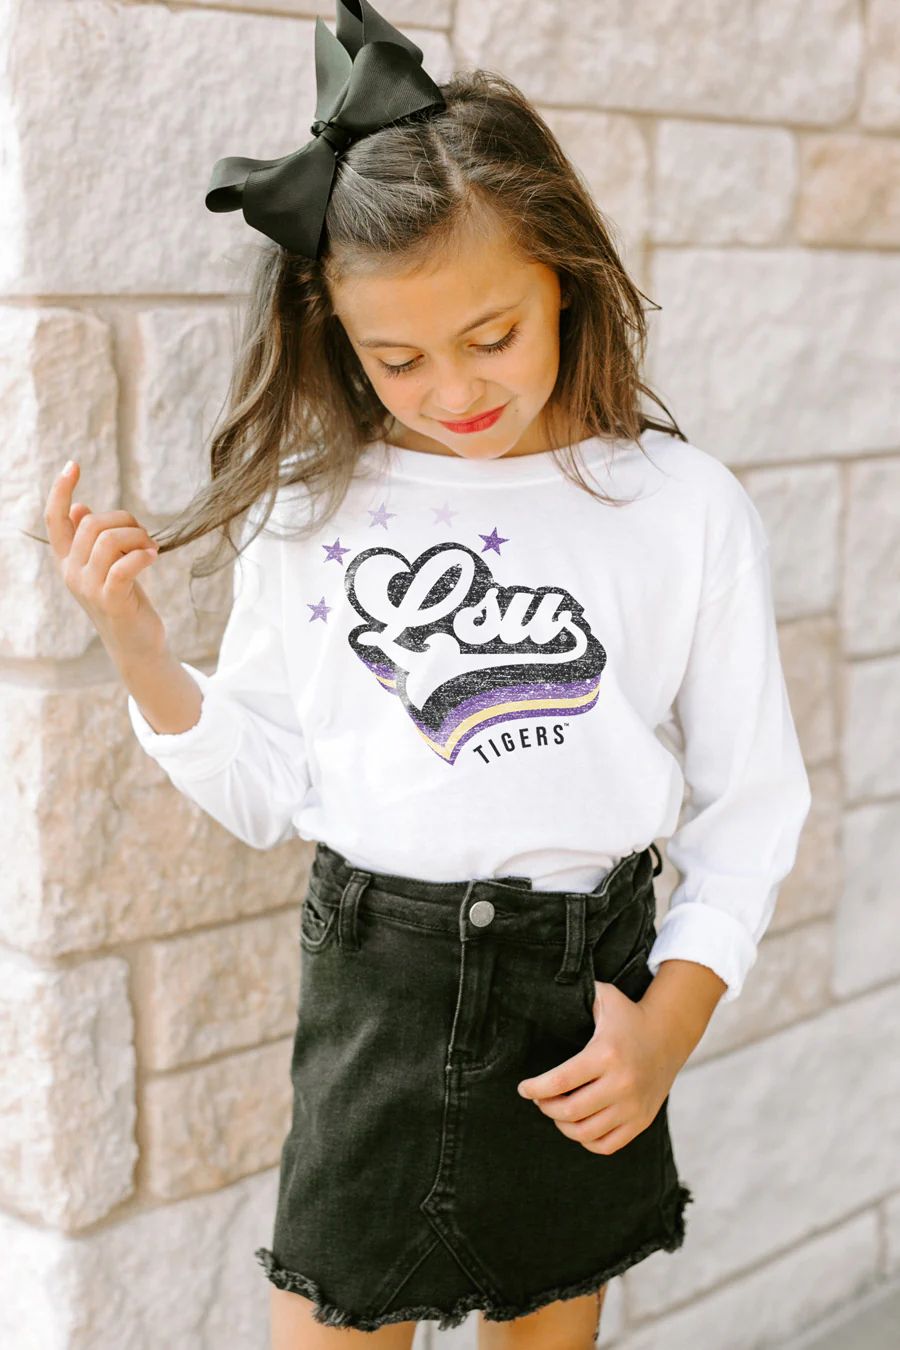 Lsu Tigers "Vivacious Varsity Star" Long Sleeve Youth Tee Youth Long Sleeve Tee | GAMEDAY COUTURE LLC